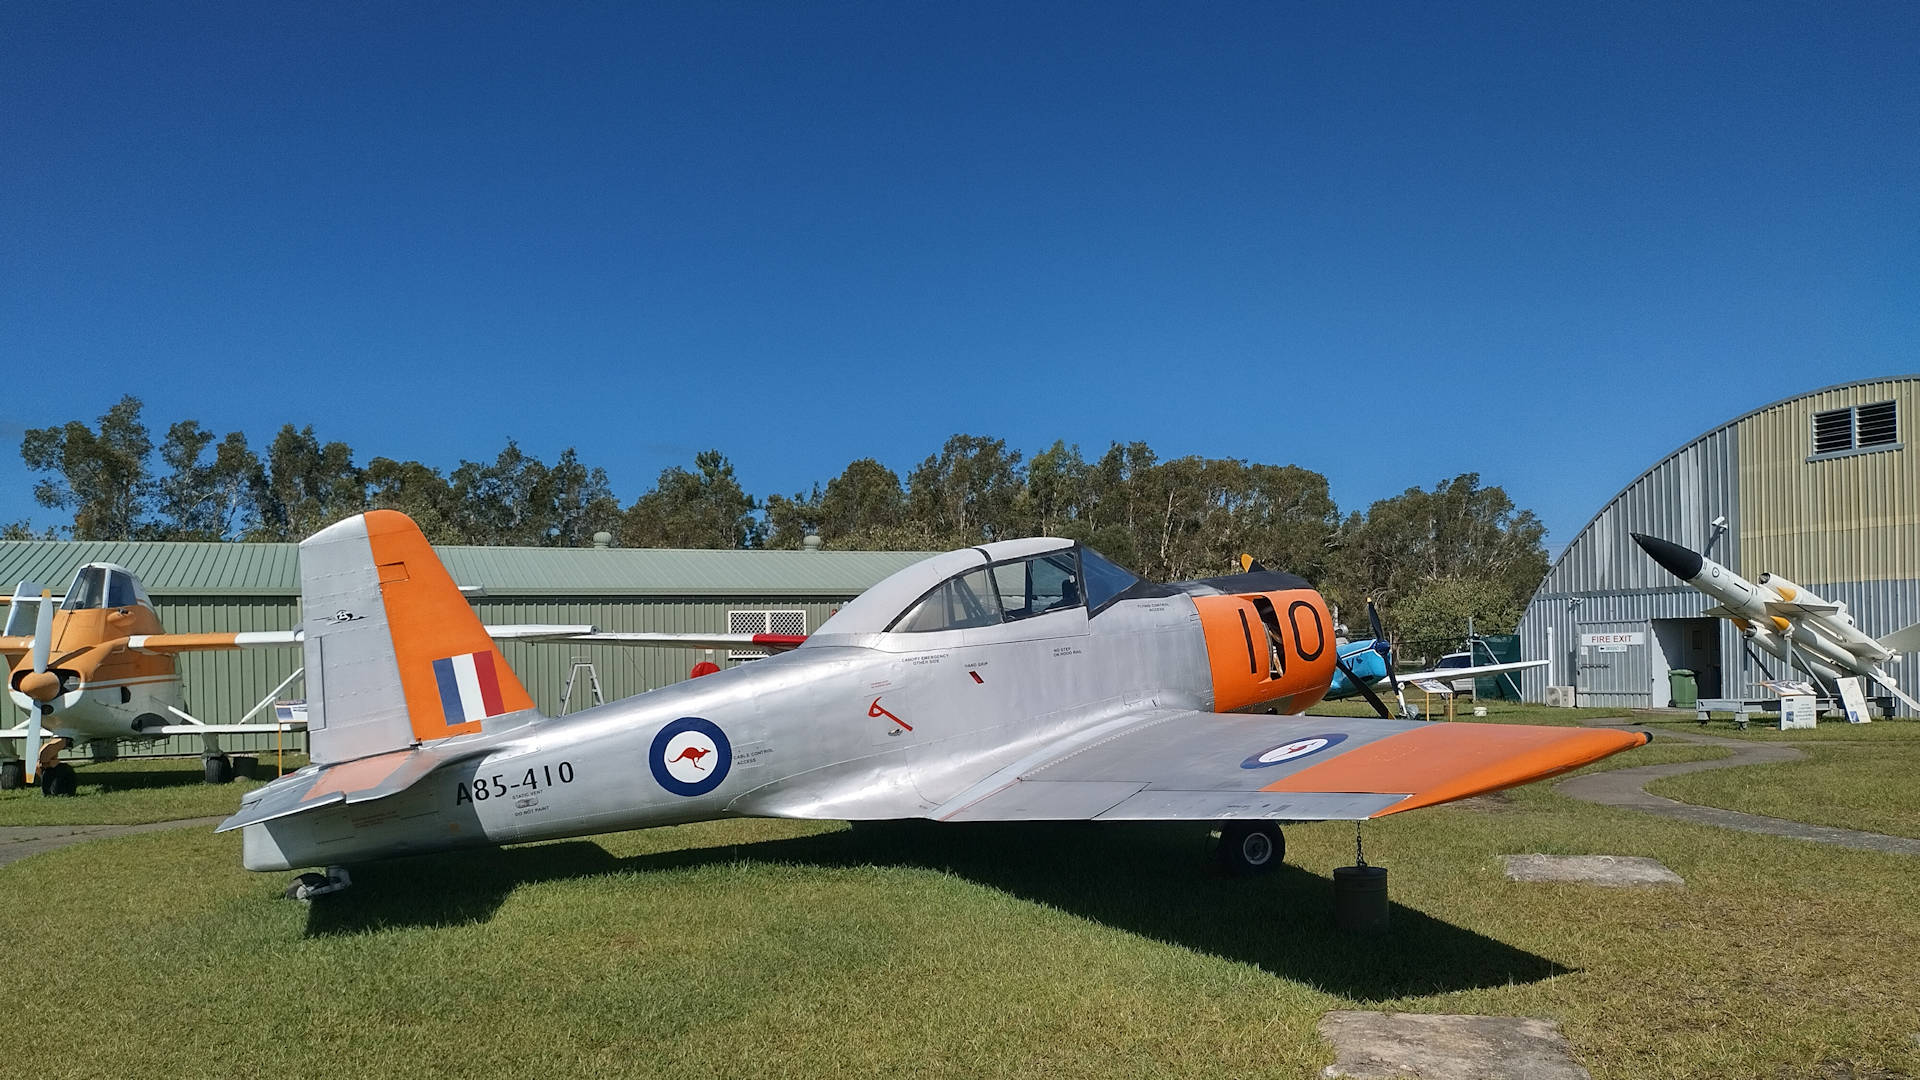 CAC CA-22/25 Winjeel training aircraft from the 1950s, at the Queensland Air Museum in Caloundra